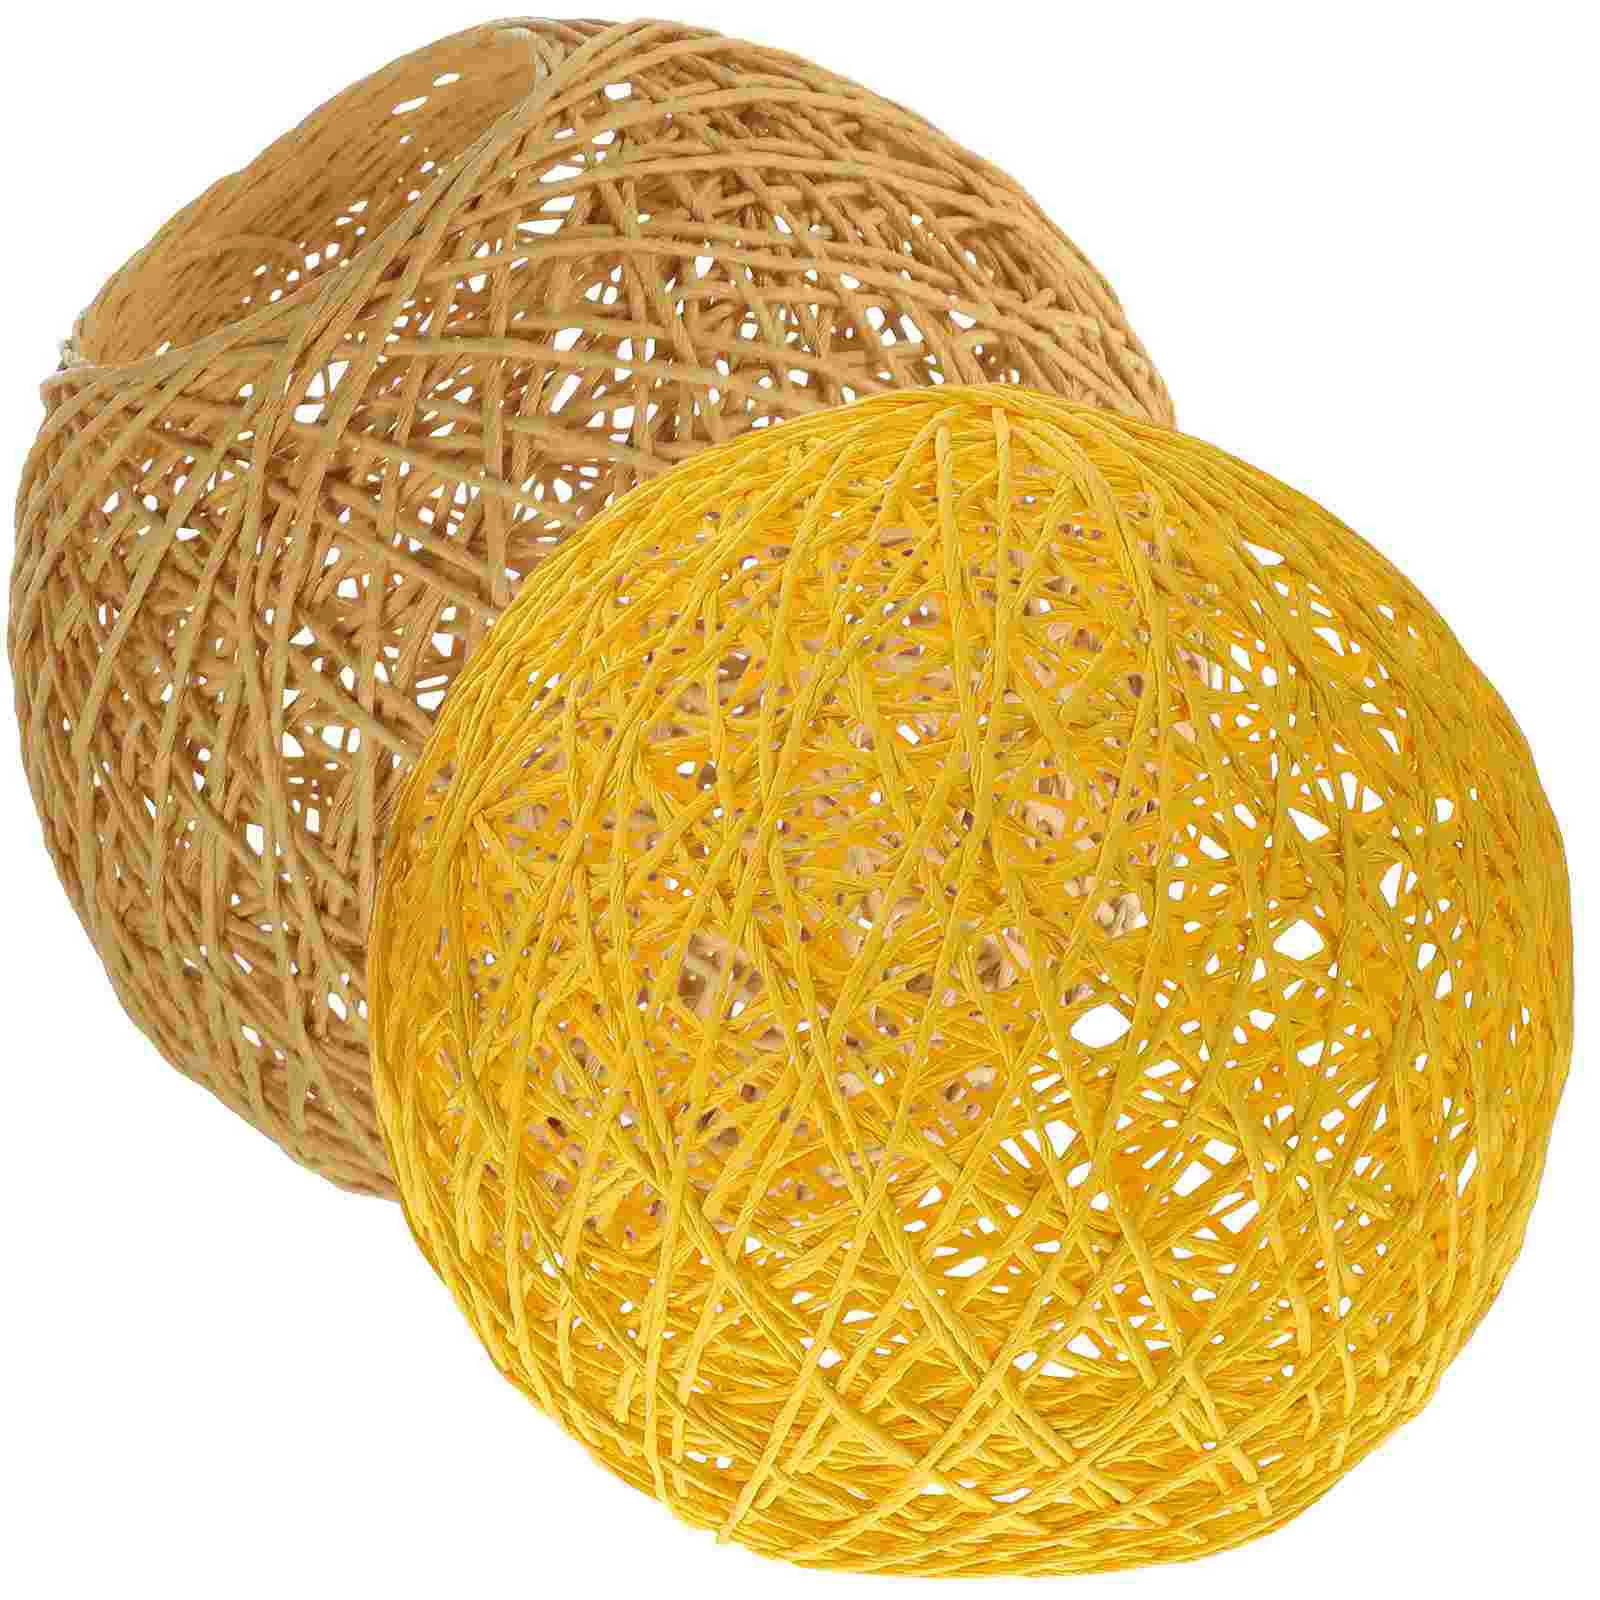 

2 Pcs Takraw Lampshade Accessory Rustic Shades Replacement Colorful Decor Ceiling Woven Lampshades Yellow Home Decorative